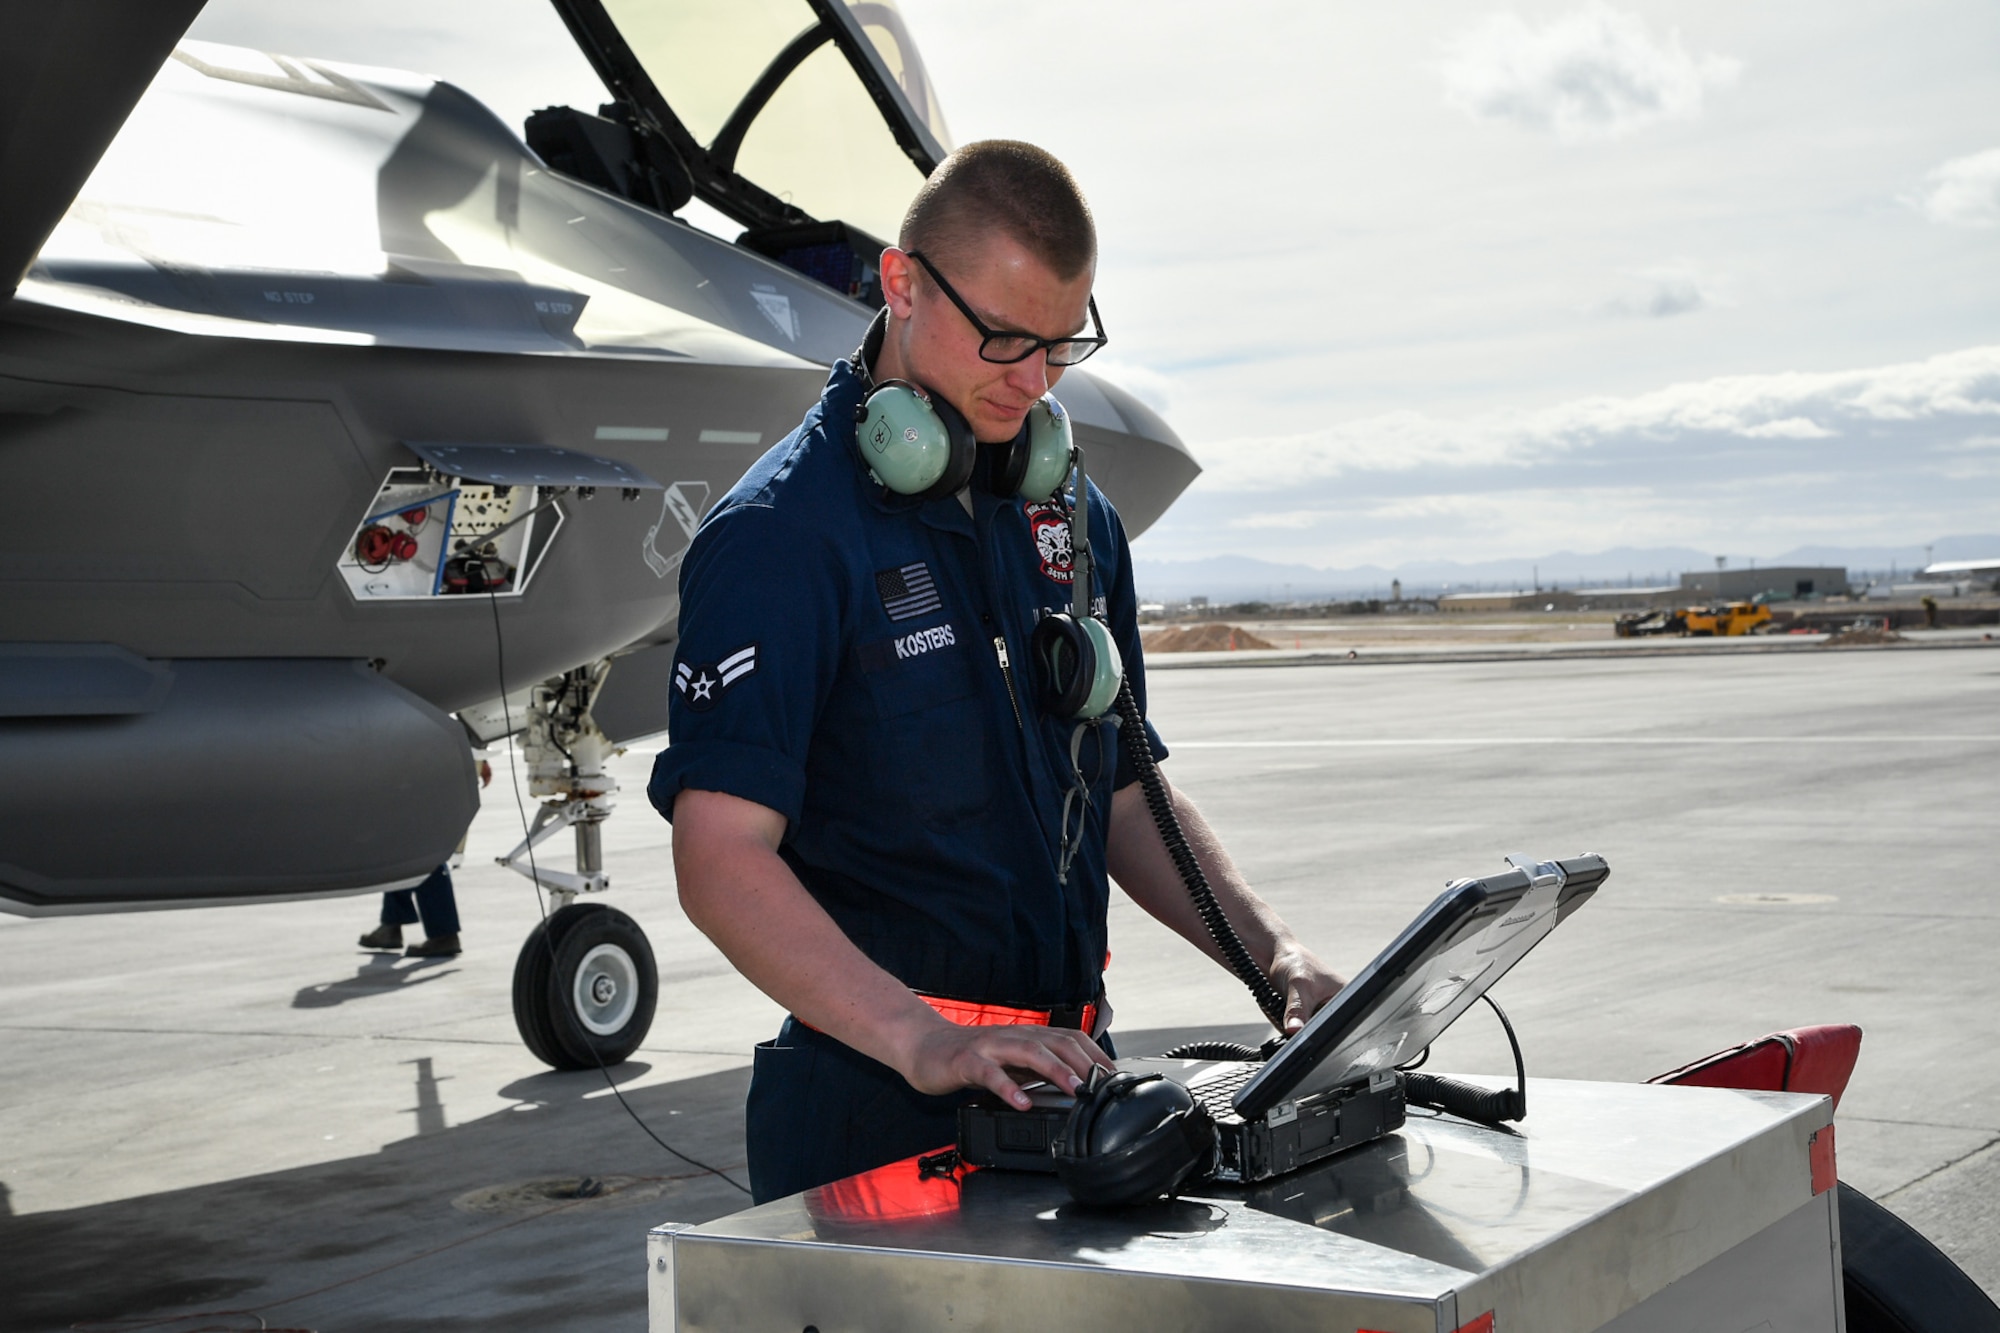 Airman 1st Class Nathan Kosters, a crew chief with the 34th Aircraft Maintenance Unit, prepares to launch an F-35A Lightning II aircraft during Red Flag 17-1 at Nellis Air Force Base, Nevada, Feb. 7, 2017. (U.S. Air Force photo/R. Nial Bradshaw)